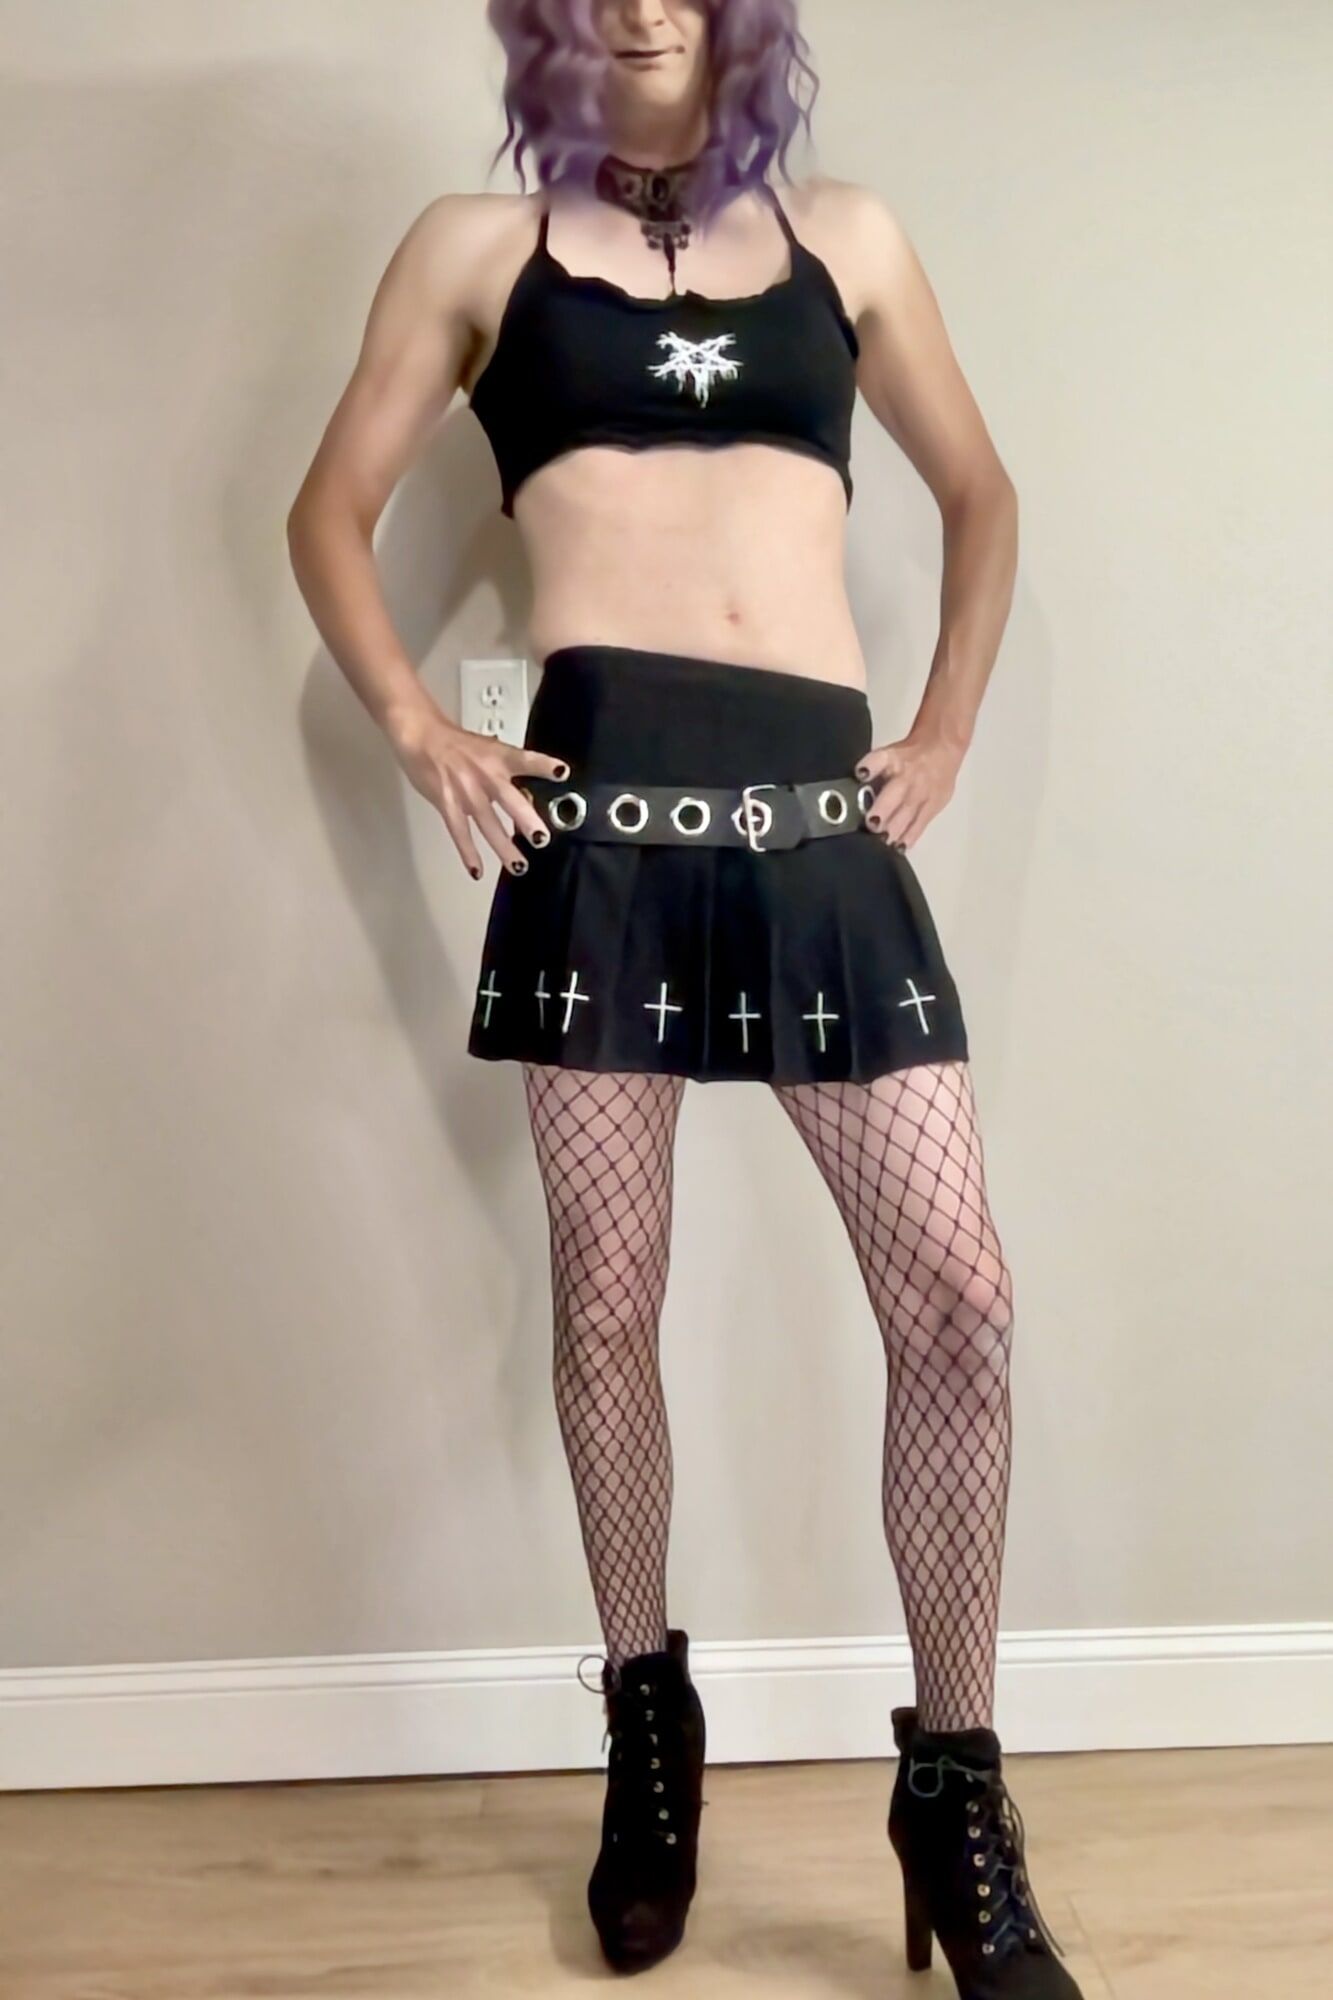 Can I be your goth slut? #3